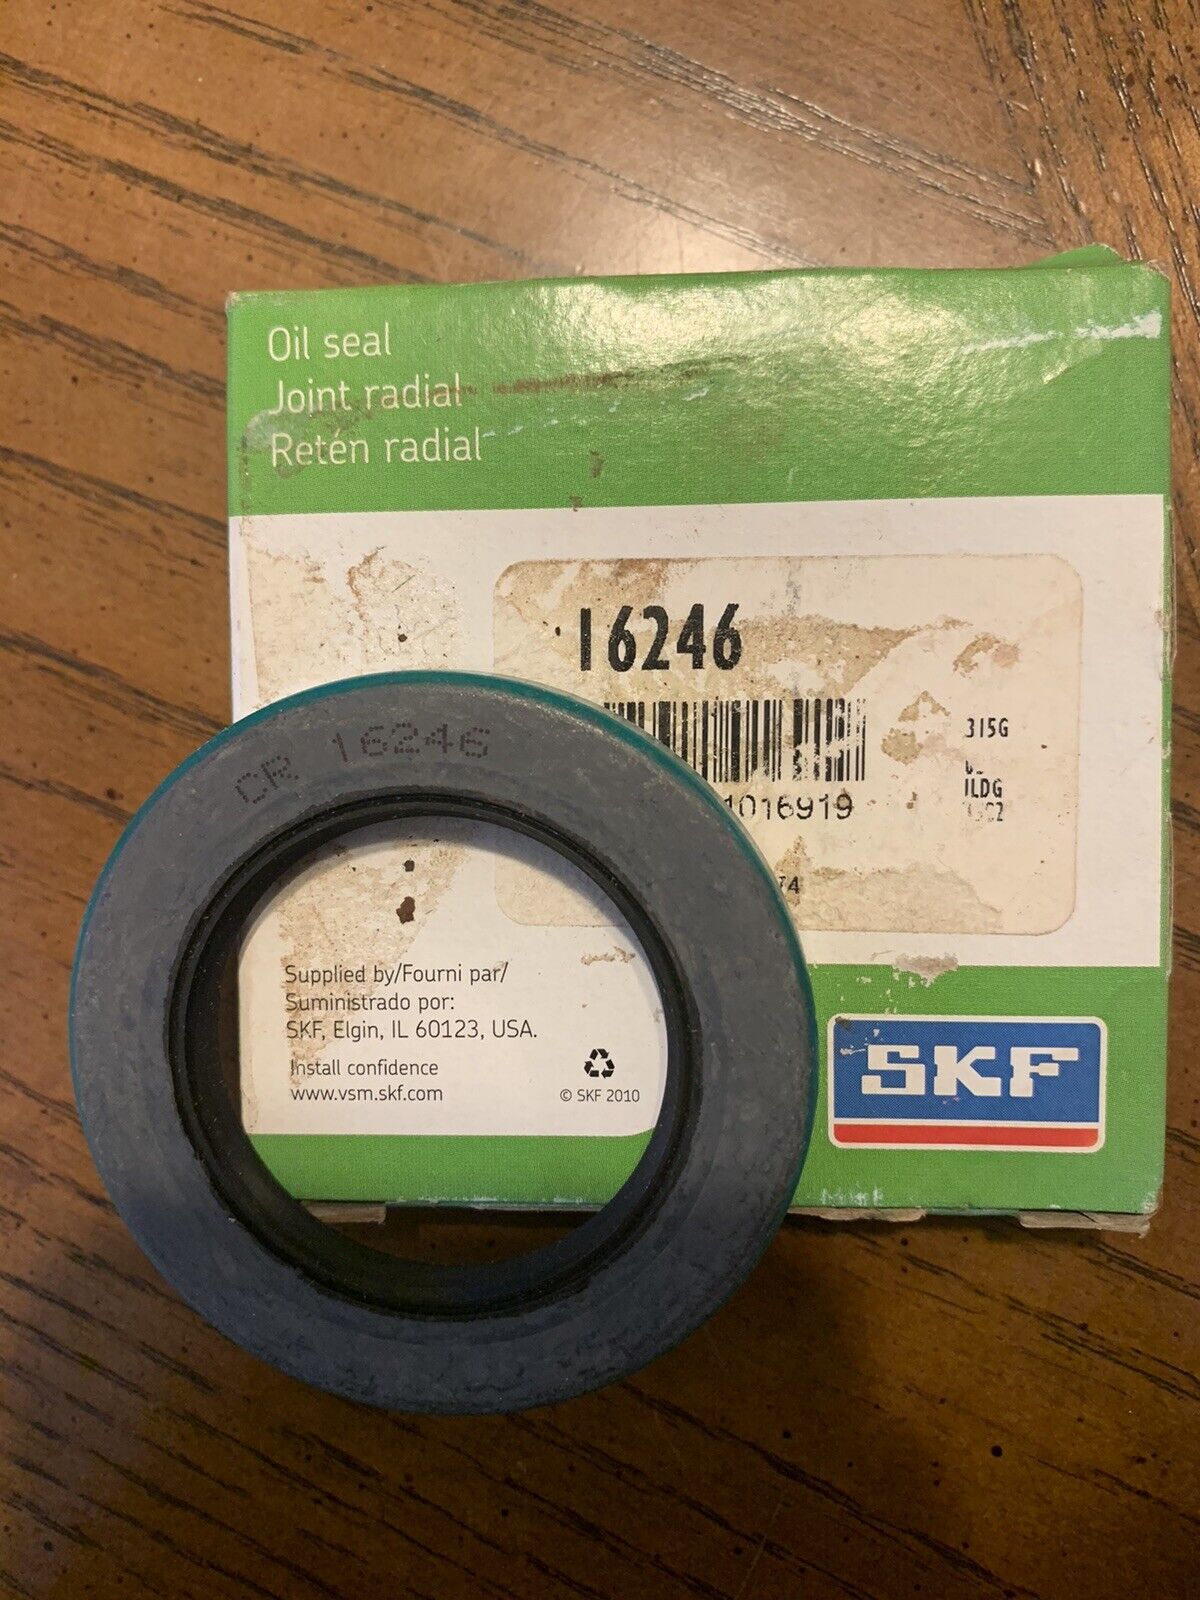 SKF Joint Radial Oil Seal 16246